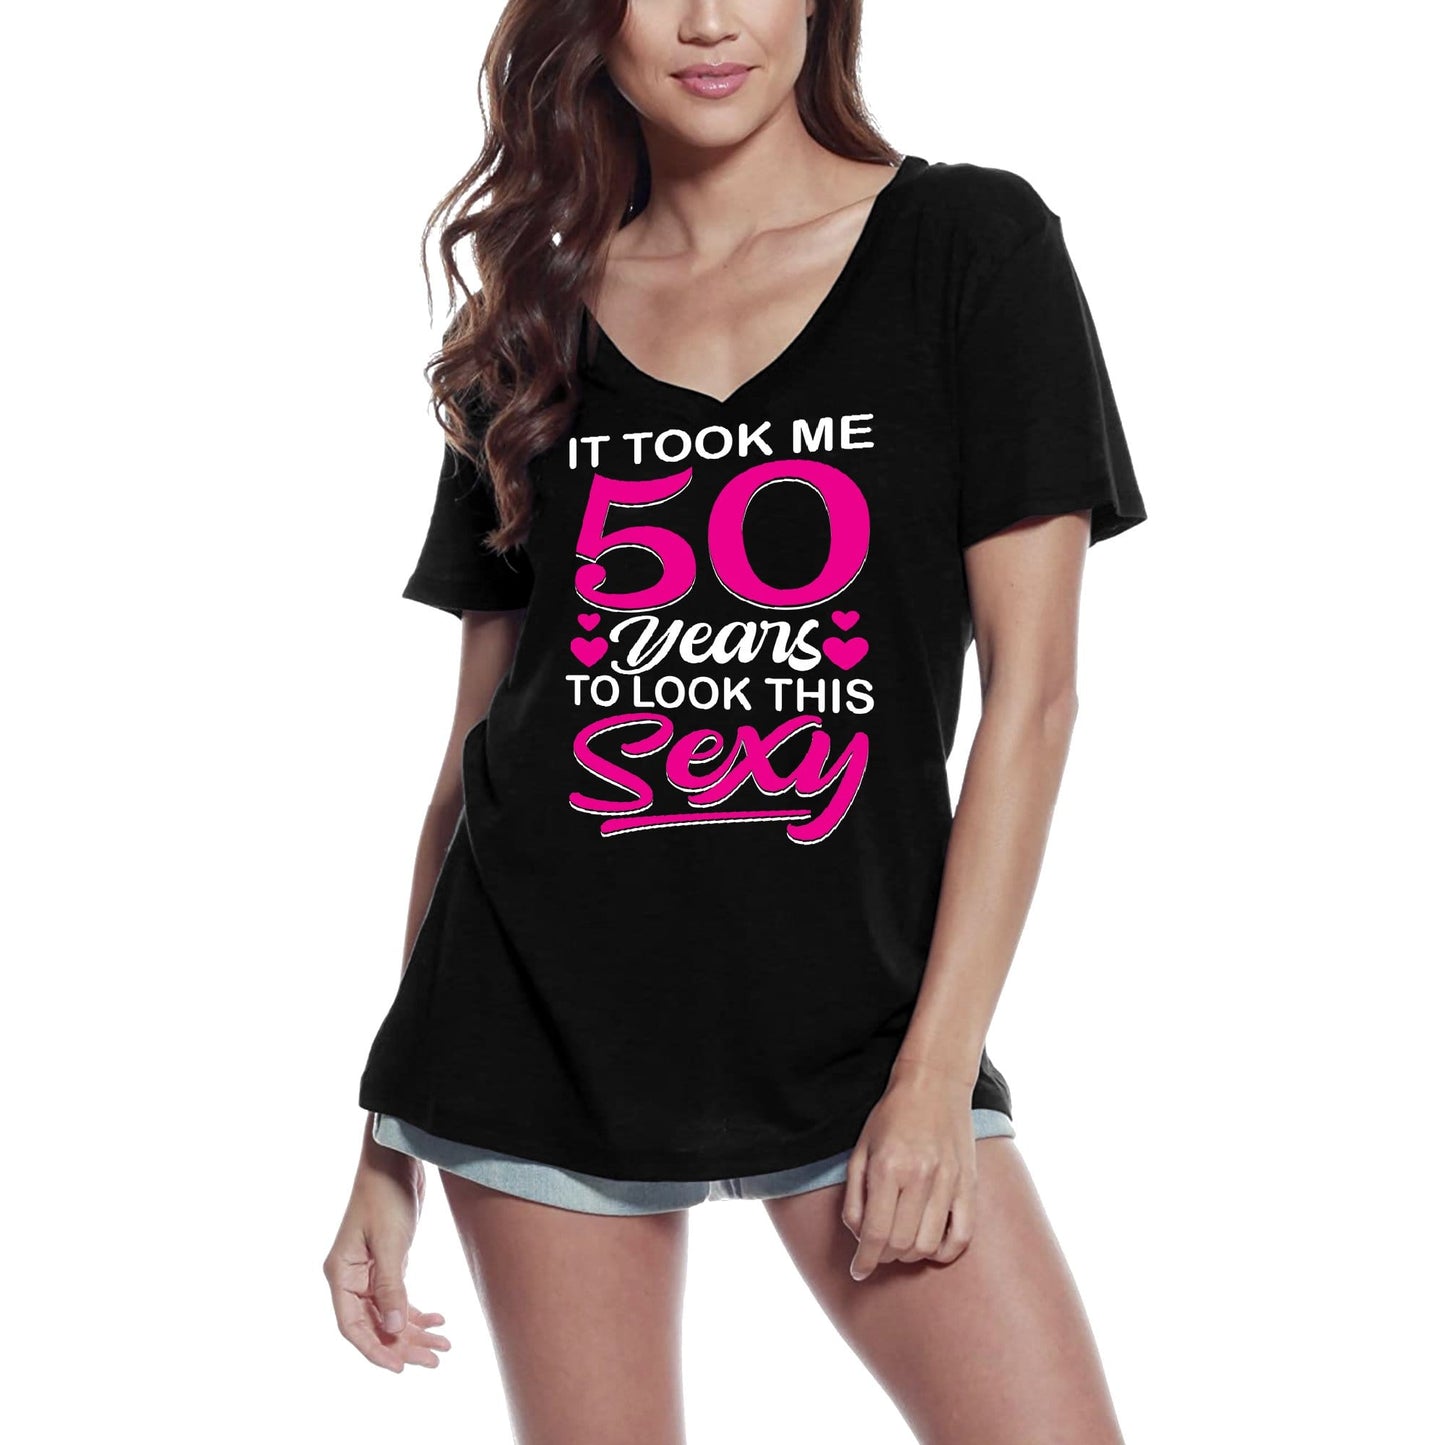 ULTRABASIC Women's T-Shirt It Took Me 50 Years to Look This Sexy - 50th Birthday Shirt for Ladies